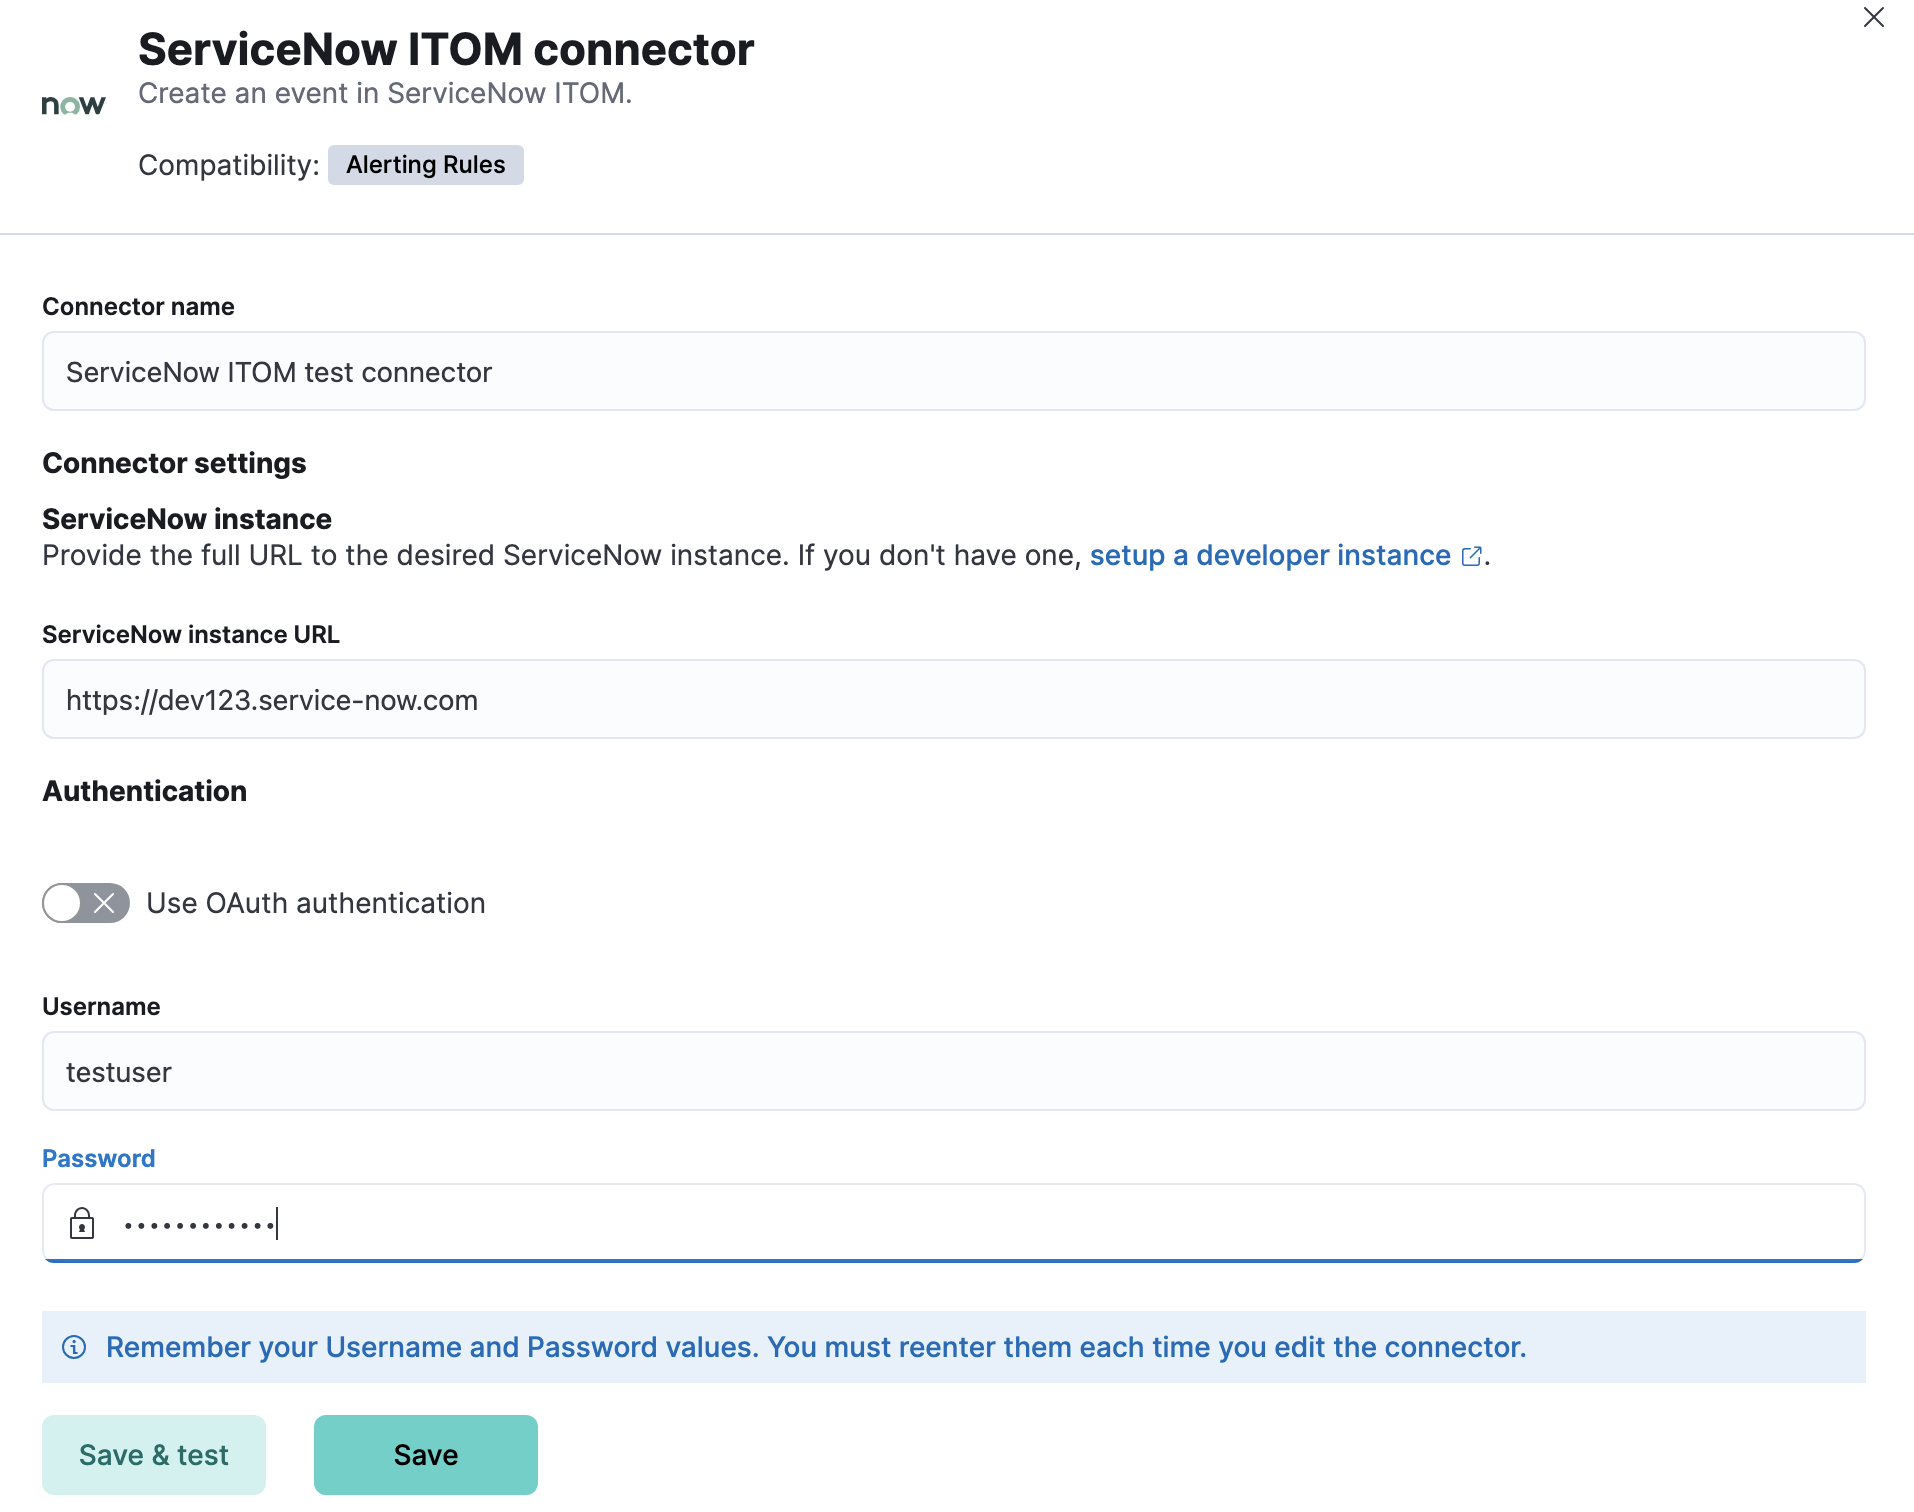 ServiceNow ITOM connector using basic auth